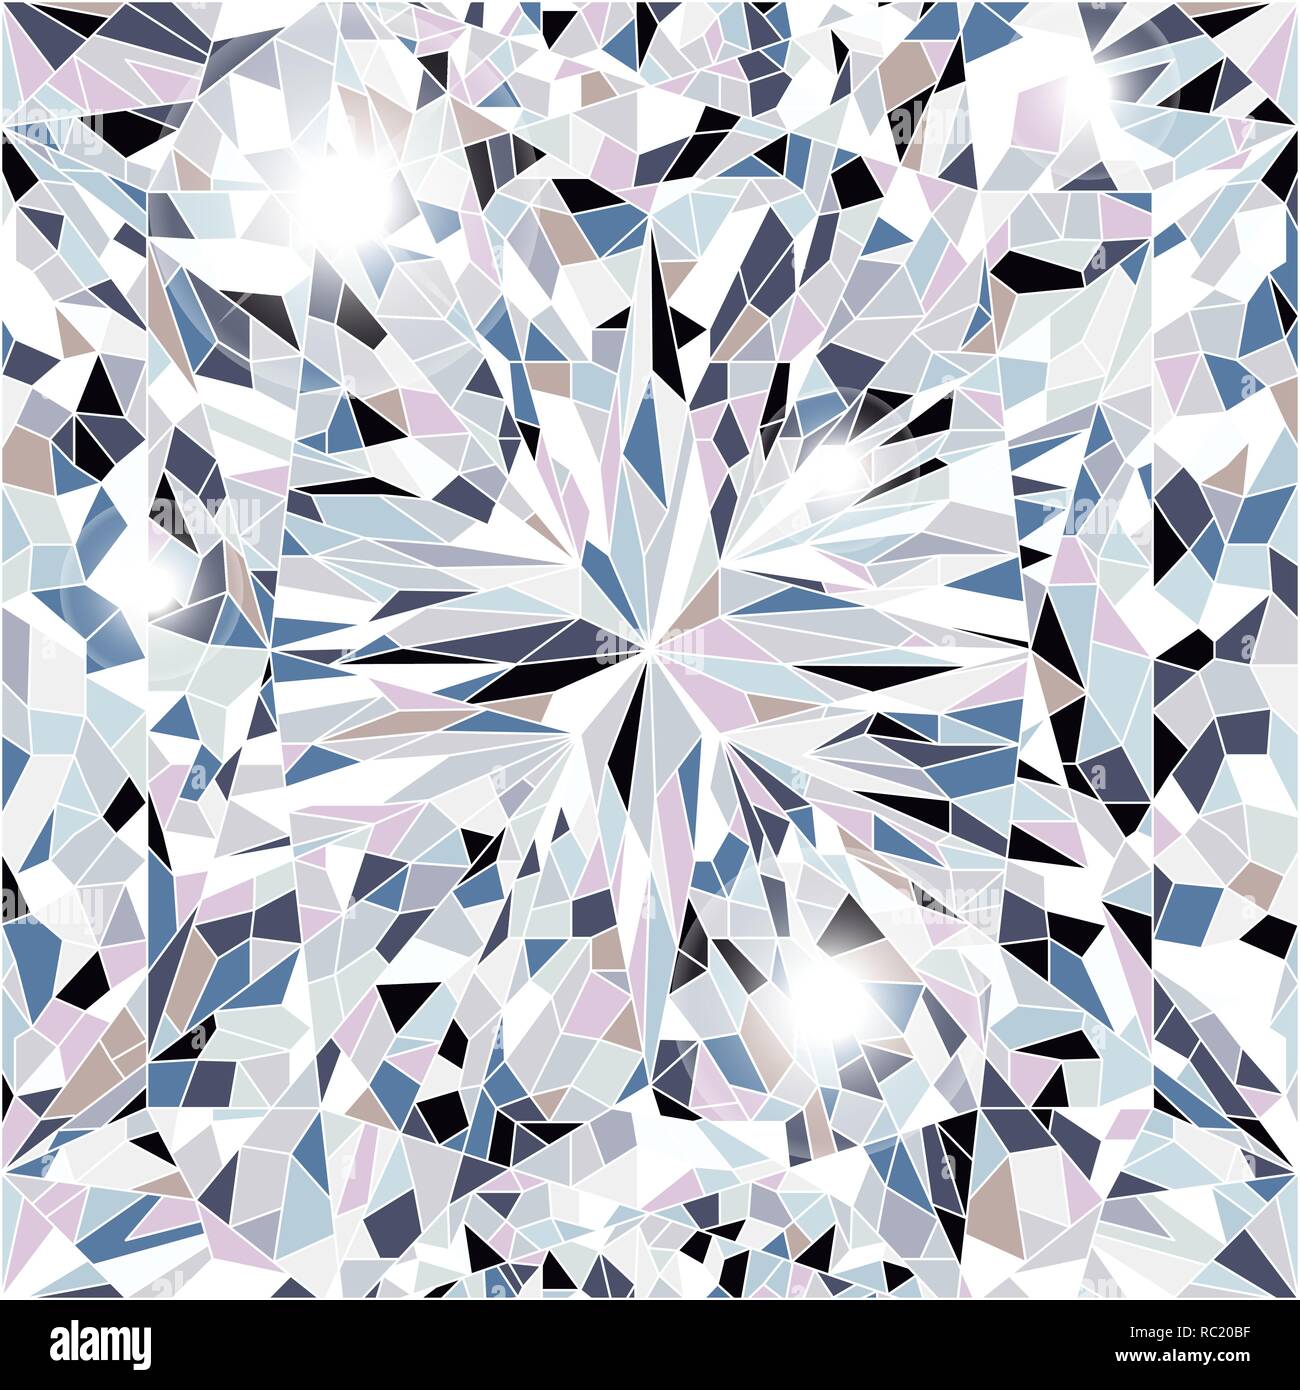 Sparkling clear diamond top view vector Stock Image & Art - Alamy